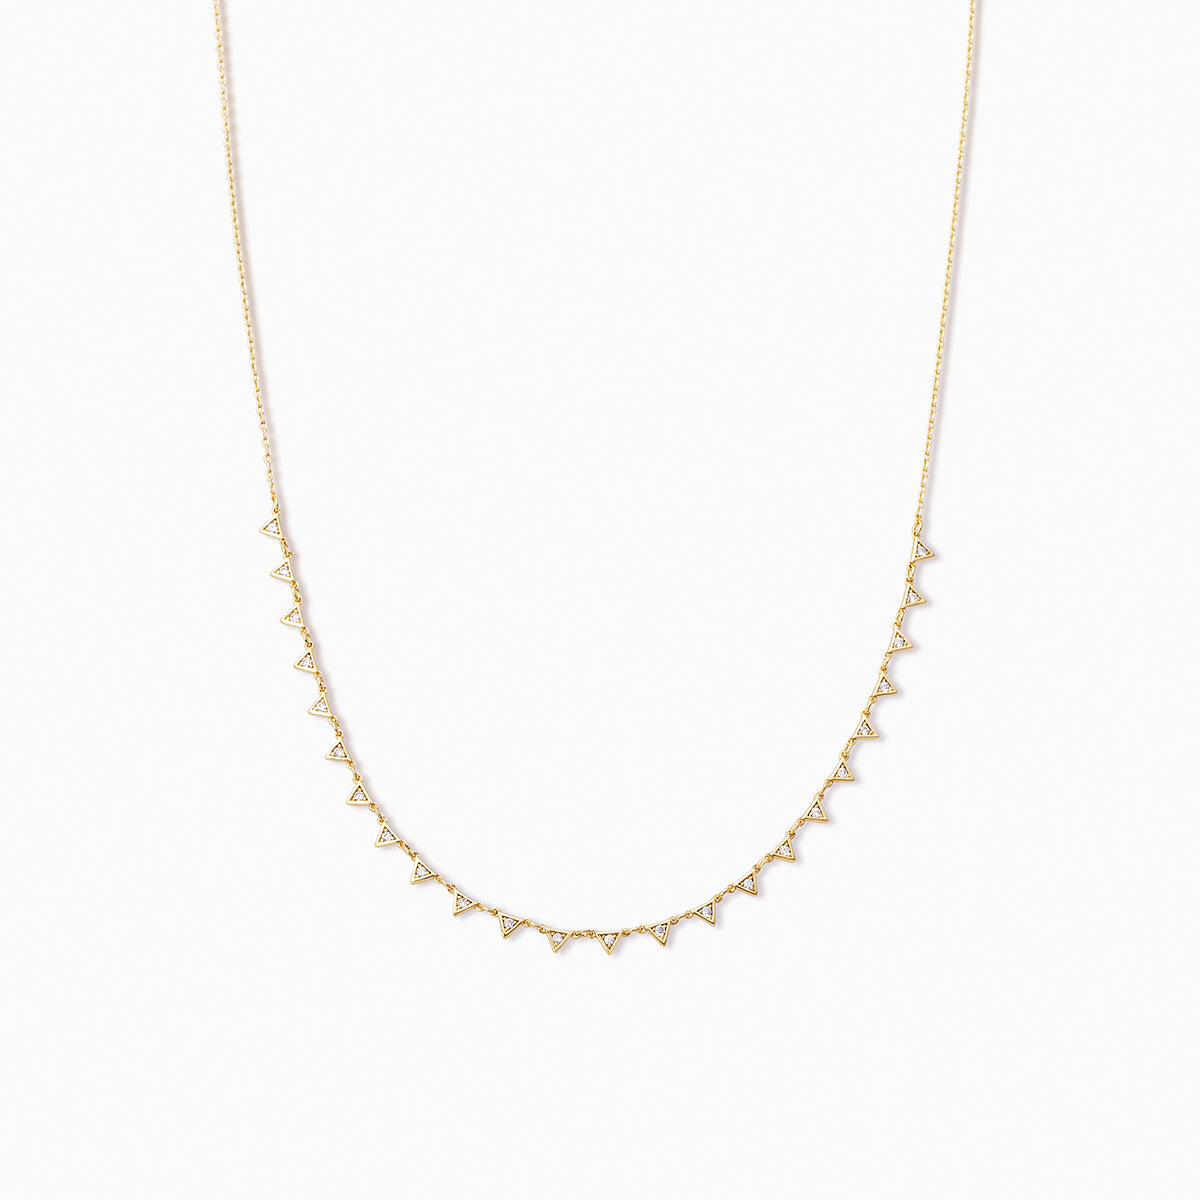 East Village Necklace | Gold | Product Image | Product Image | Uncommon James